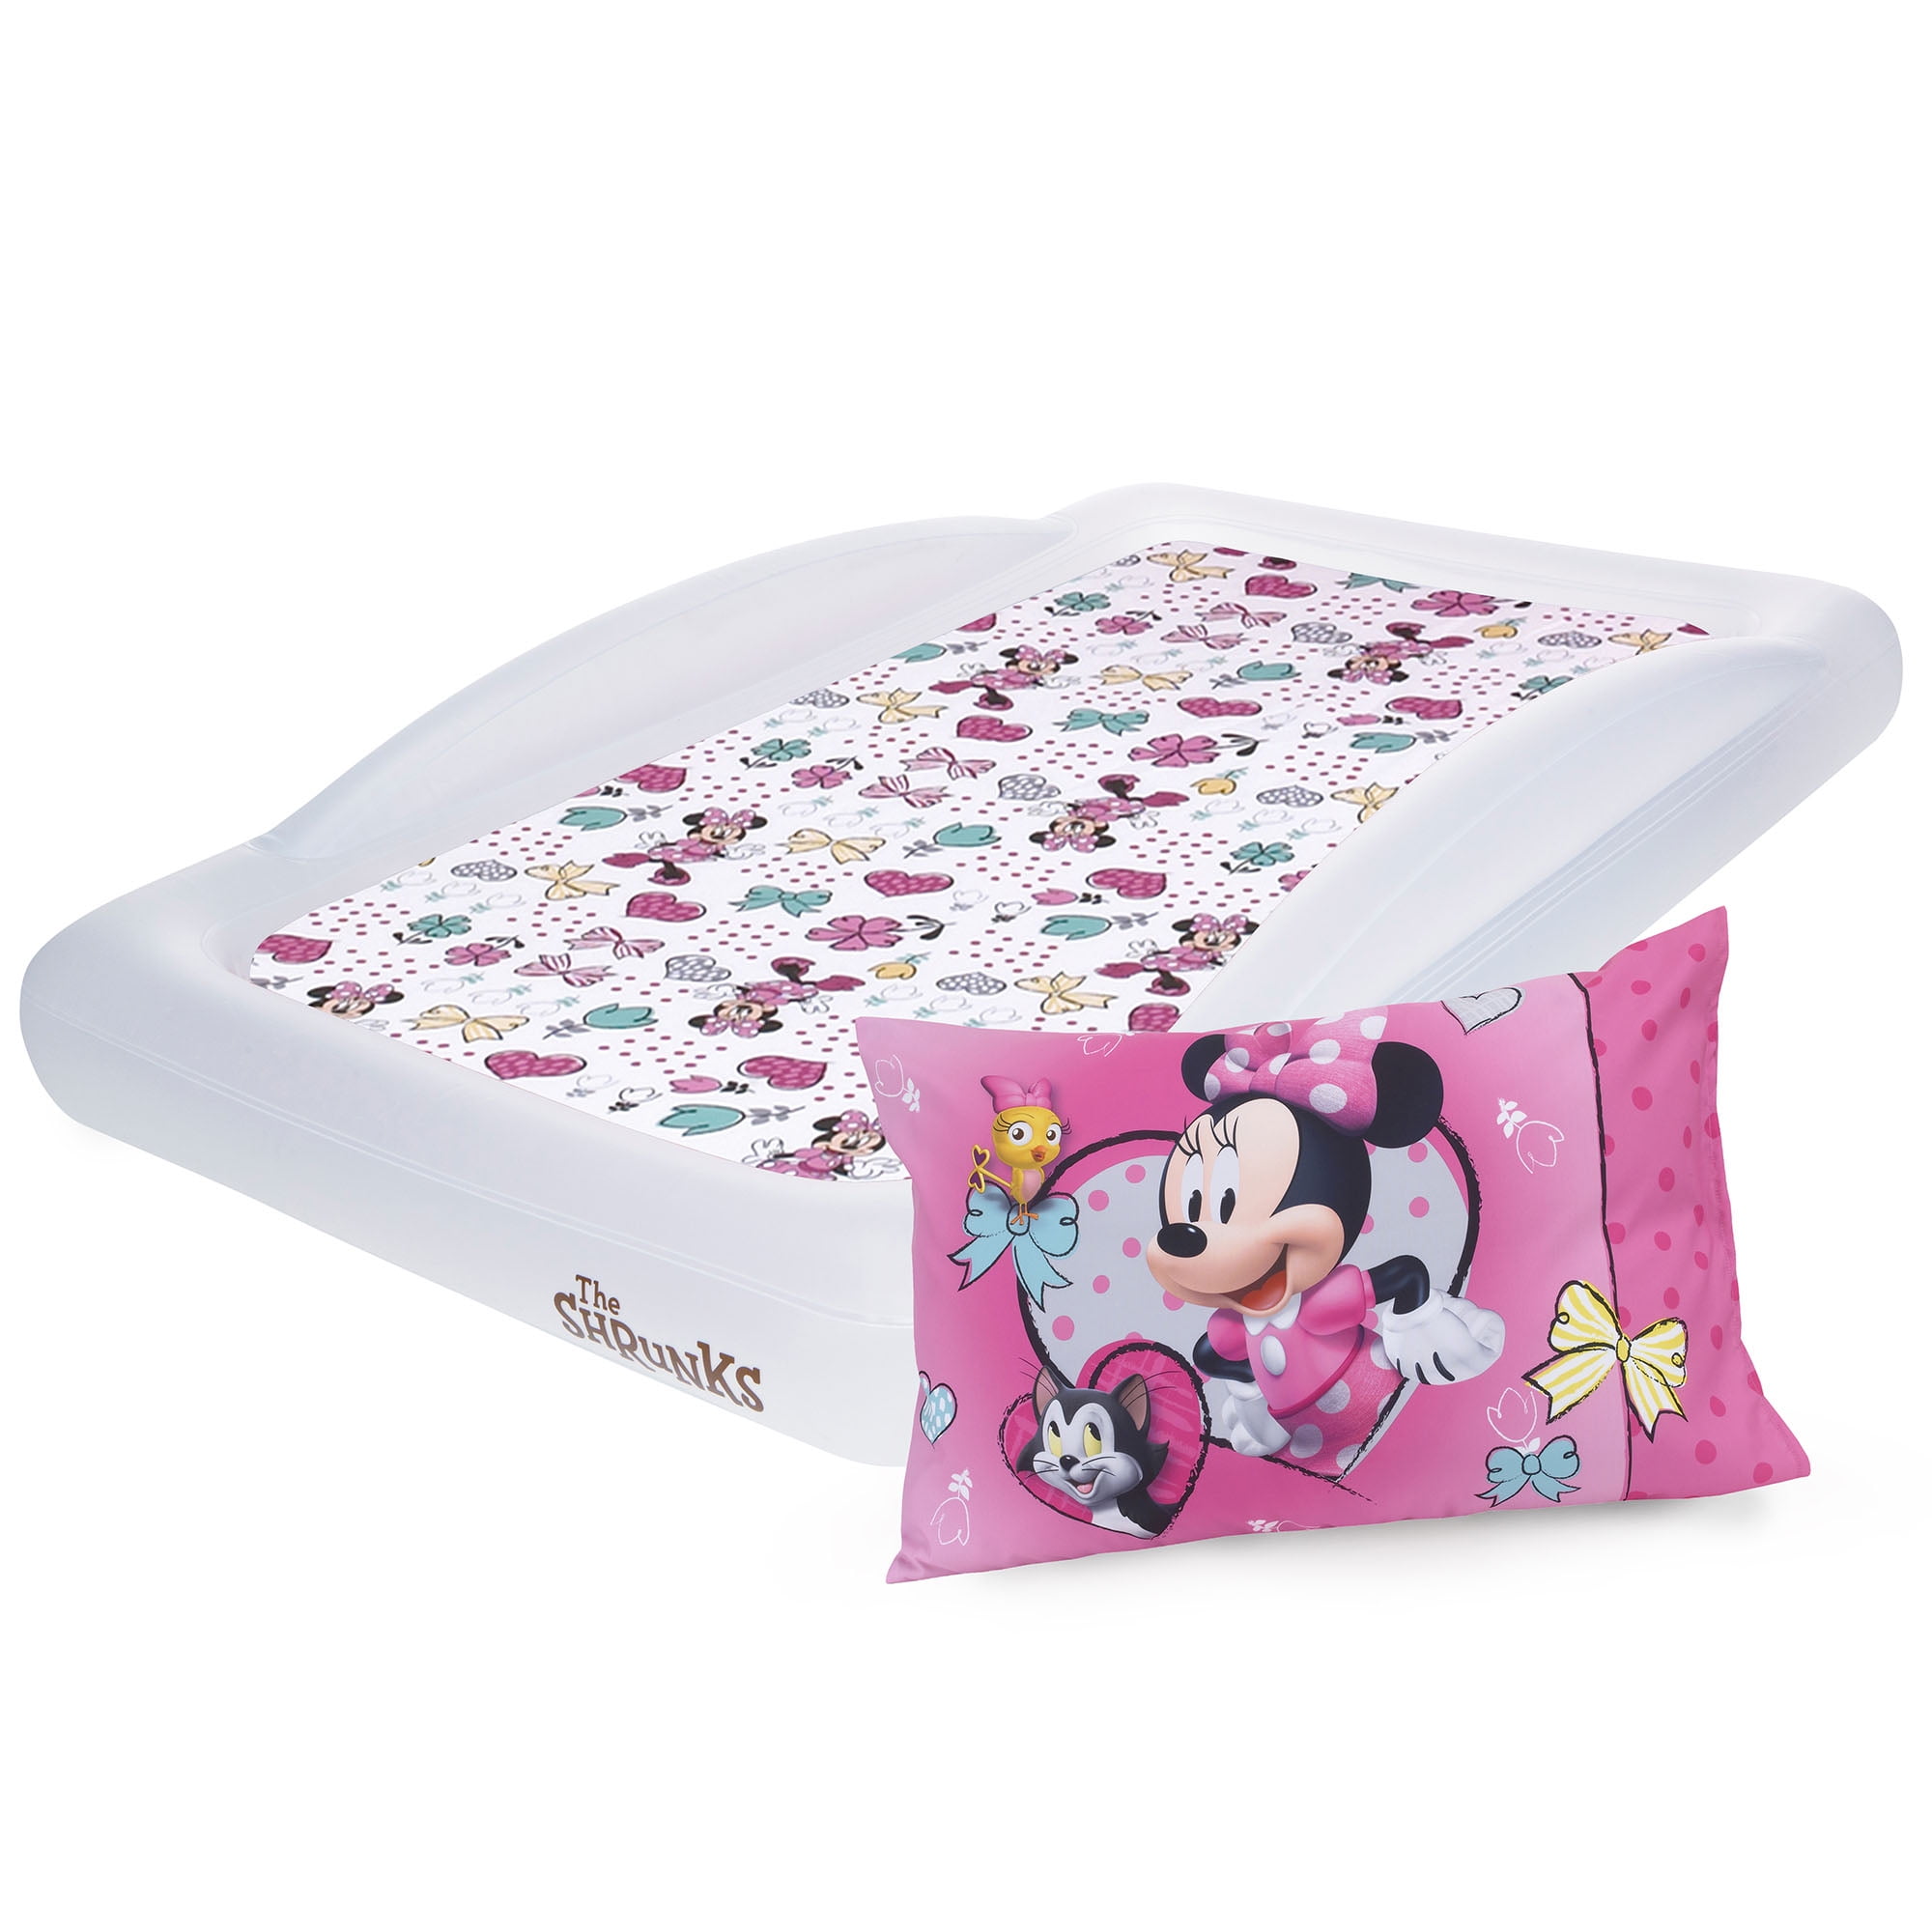 Portable Blow Up Floor Bed and Pink Disney Minnie Mouse Toddler Bedding Set The Shrunks Minnie Mouse Kids Air Mattress Inflatable Toddler Travel Bed with Safety Side Rails 